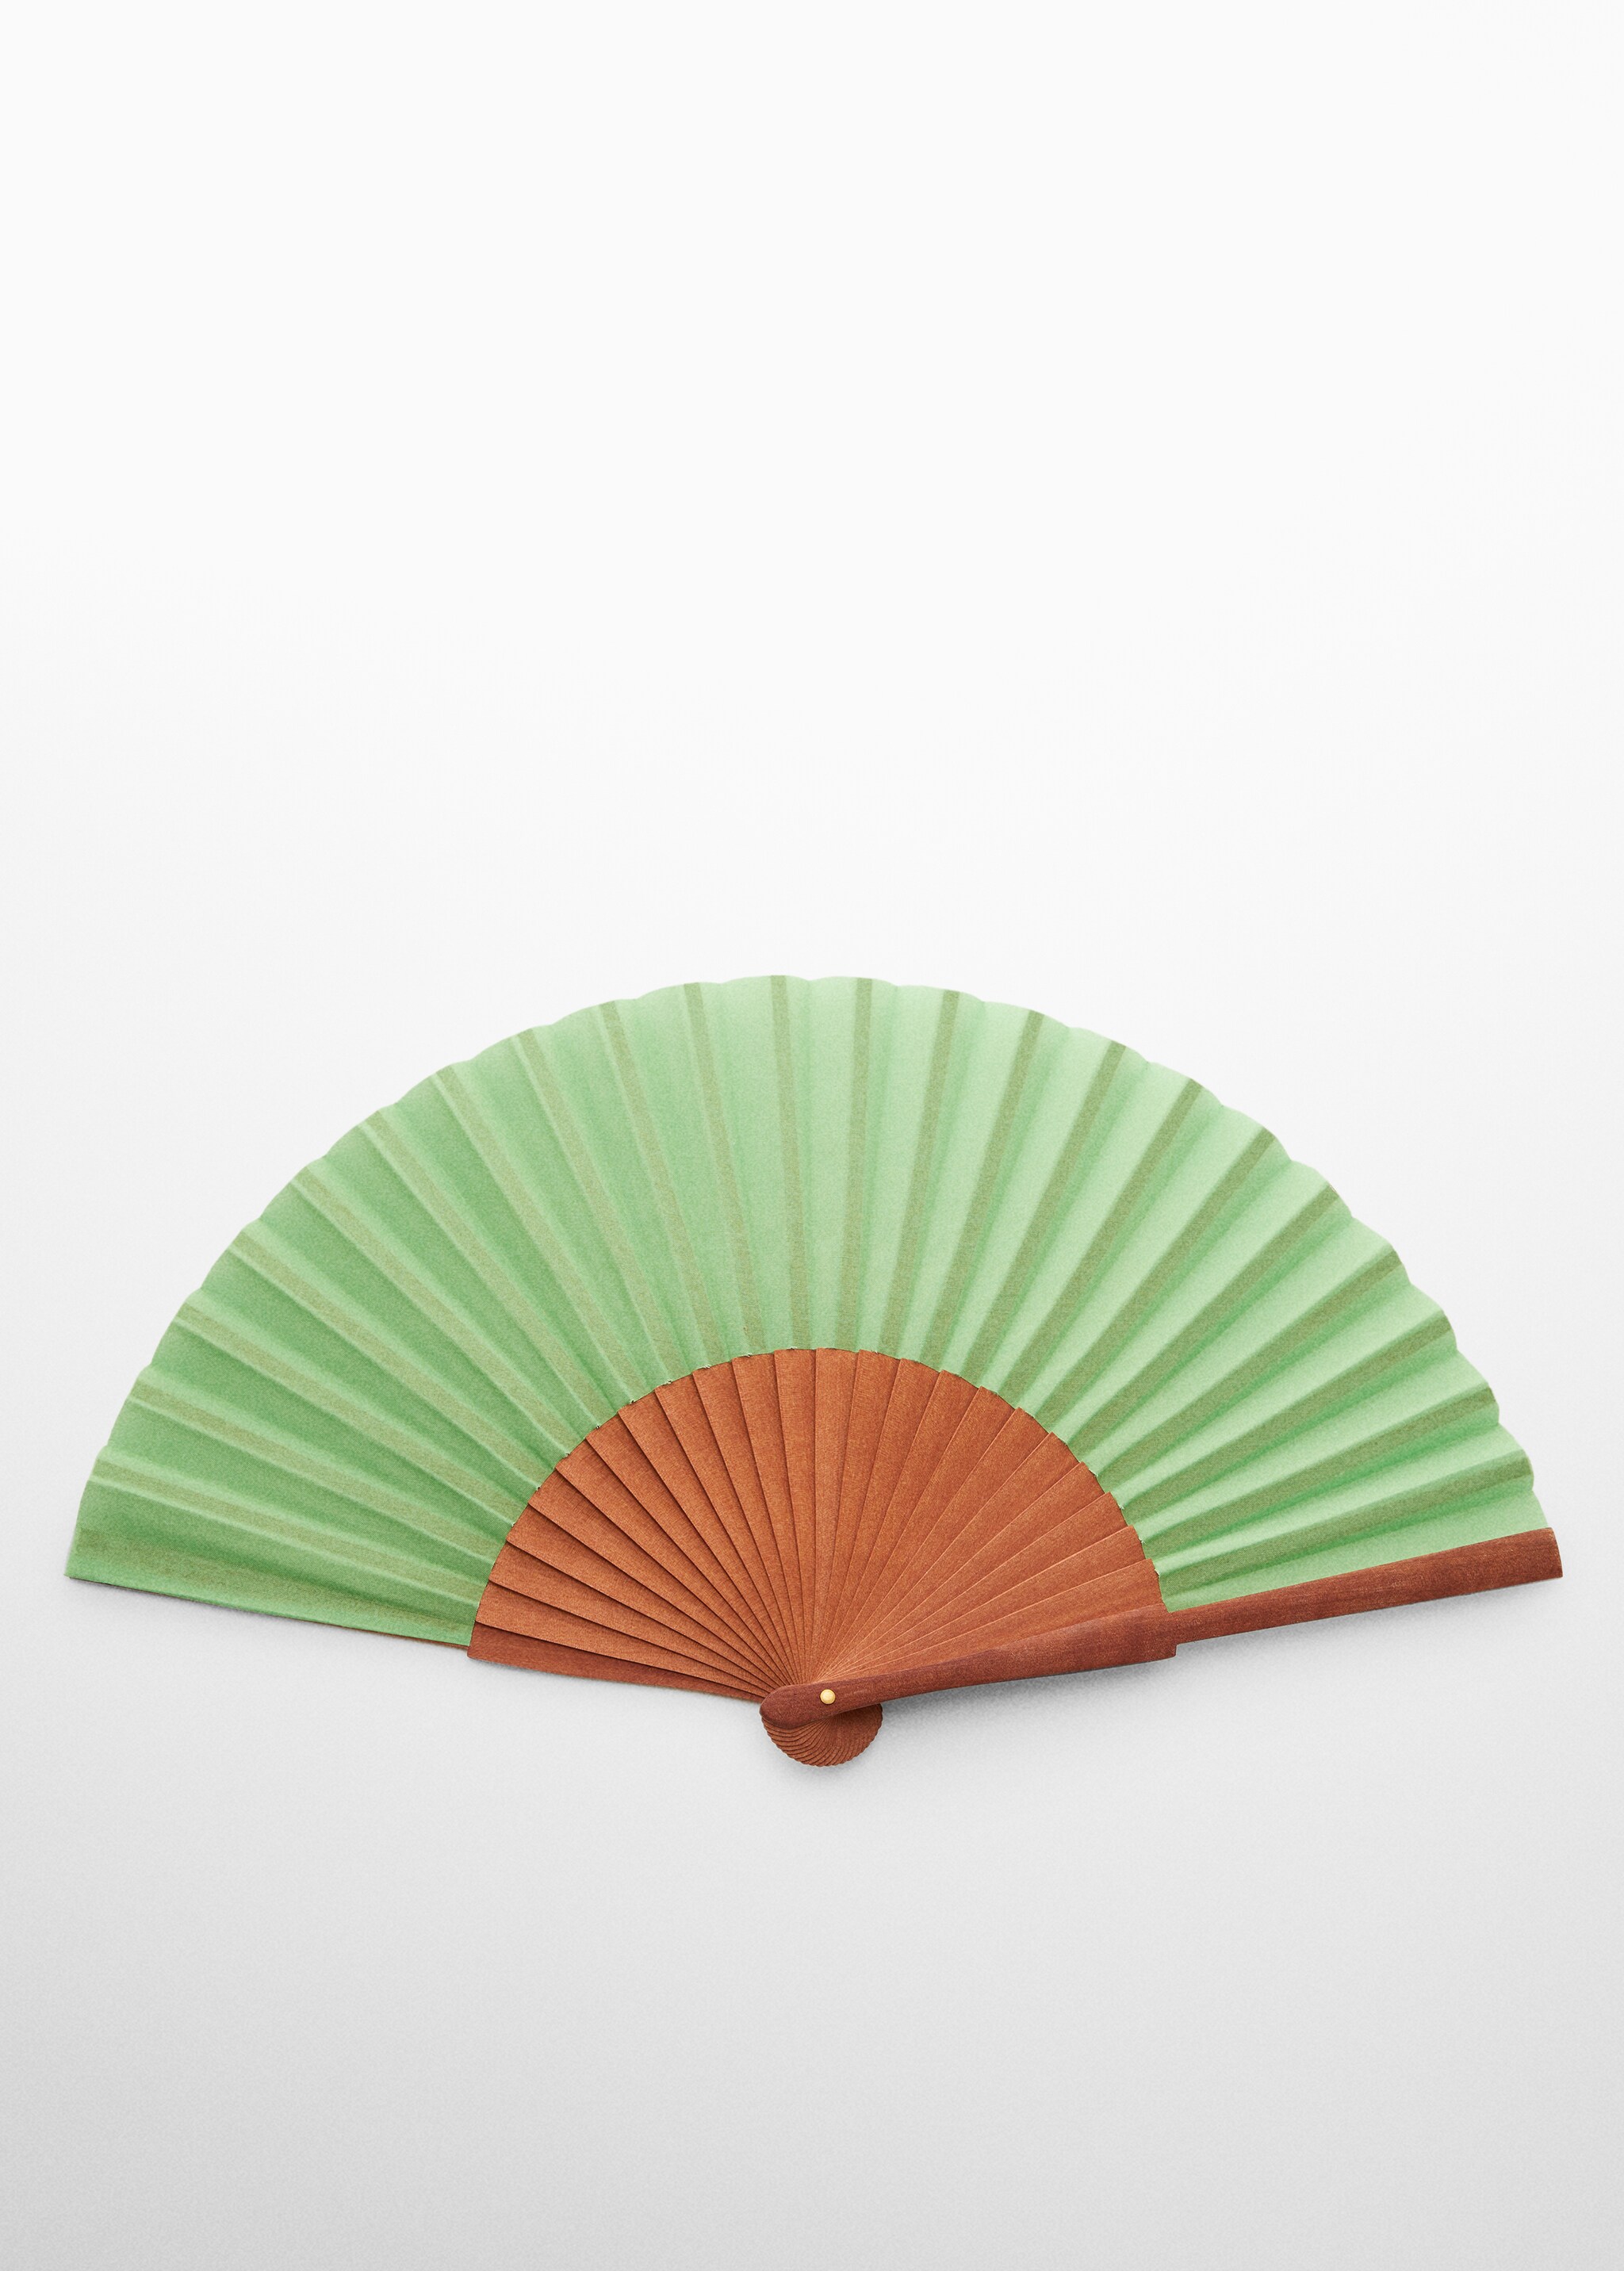 Wooden fan - Article without model